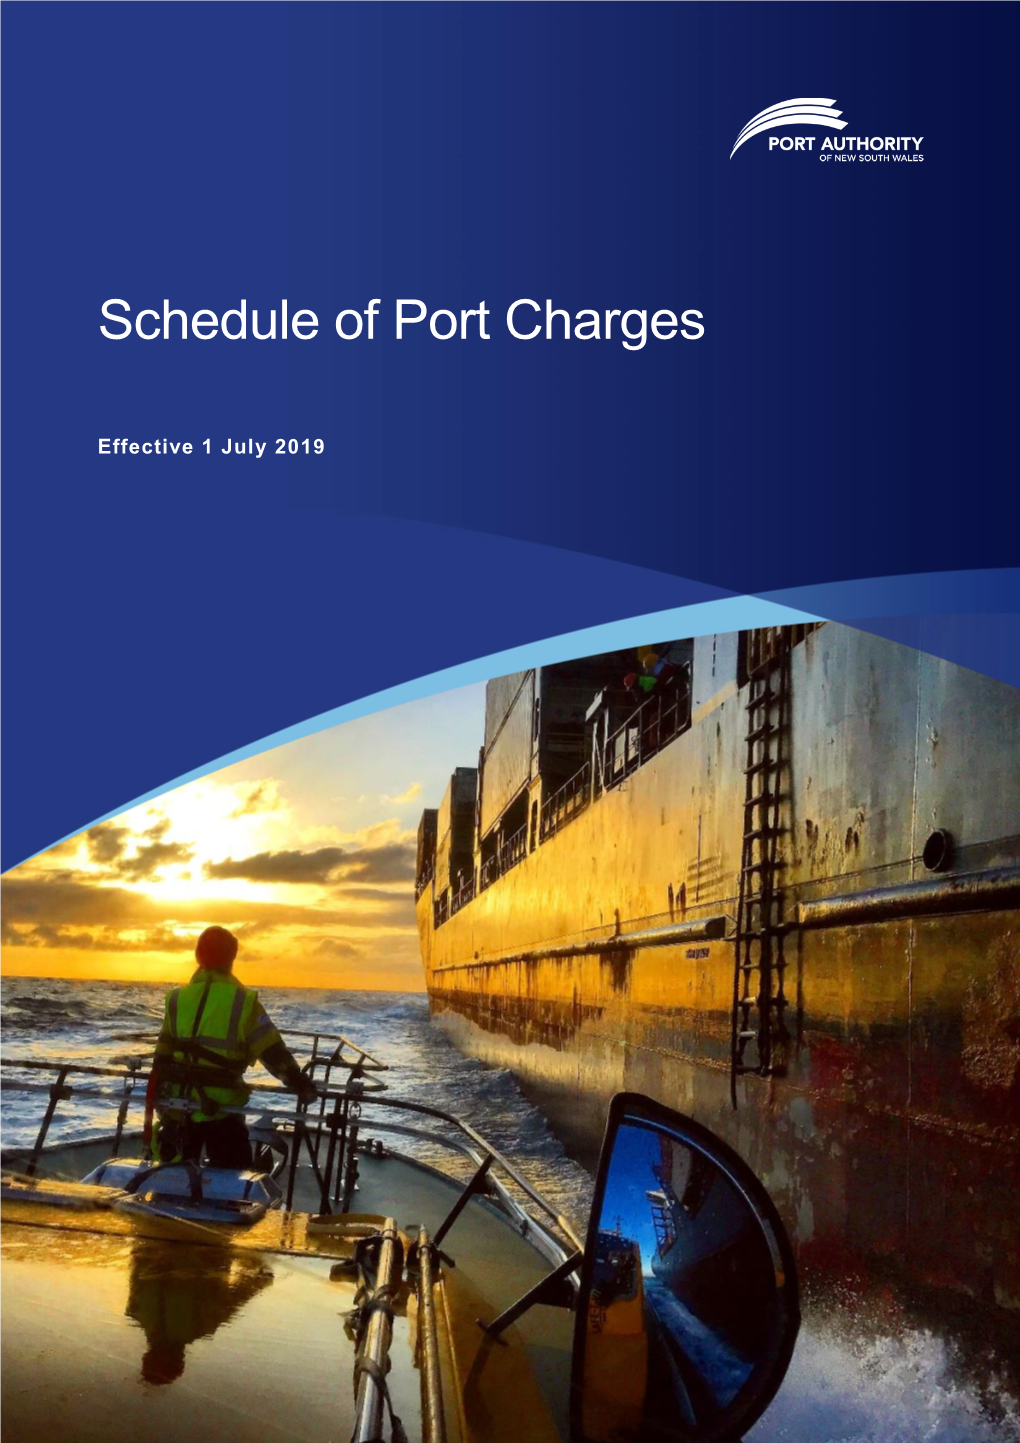 Schedule of Port Charges